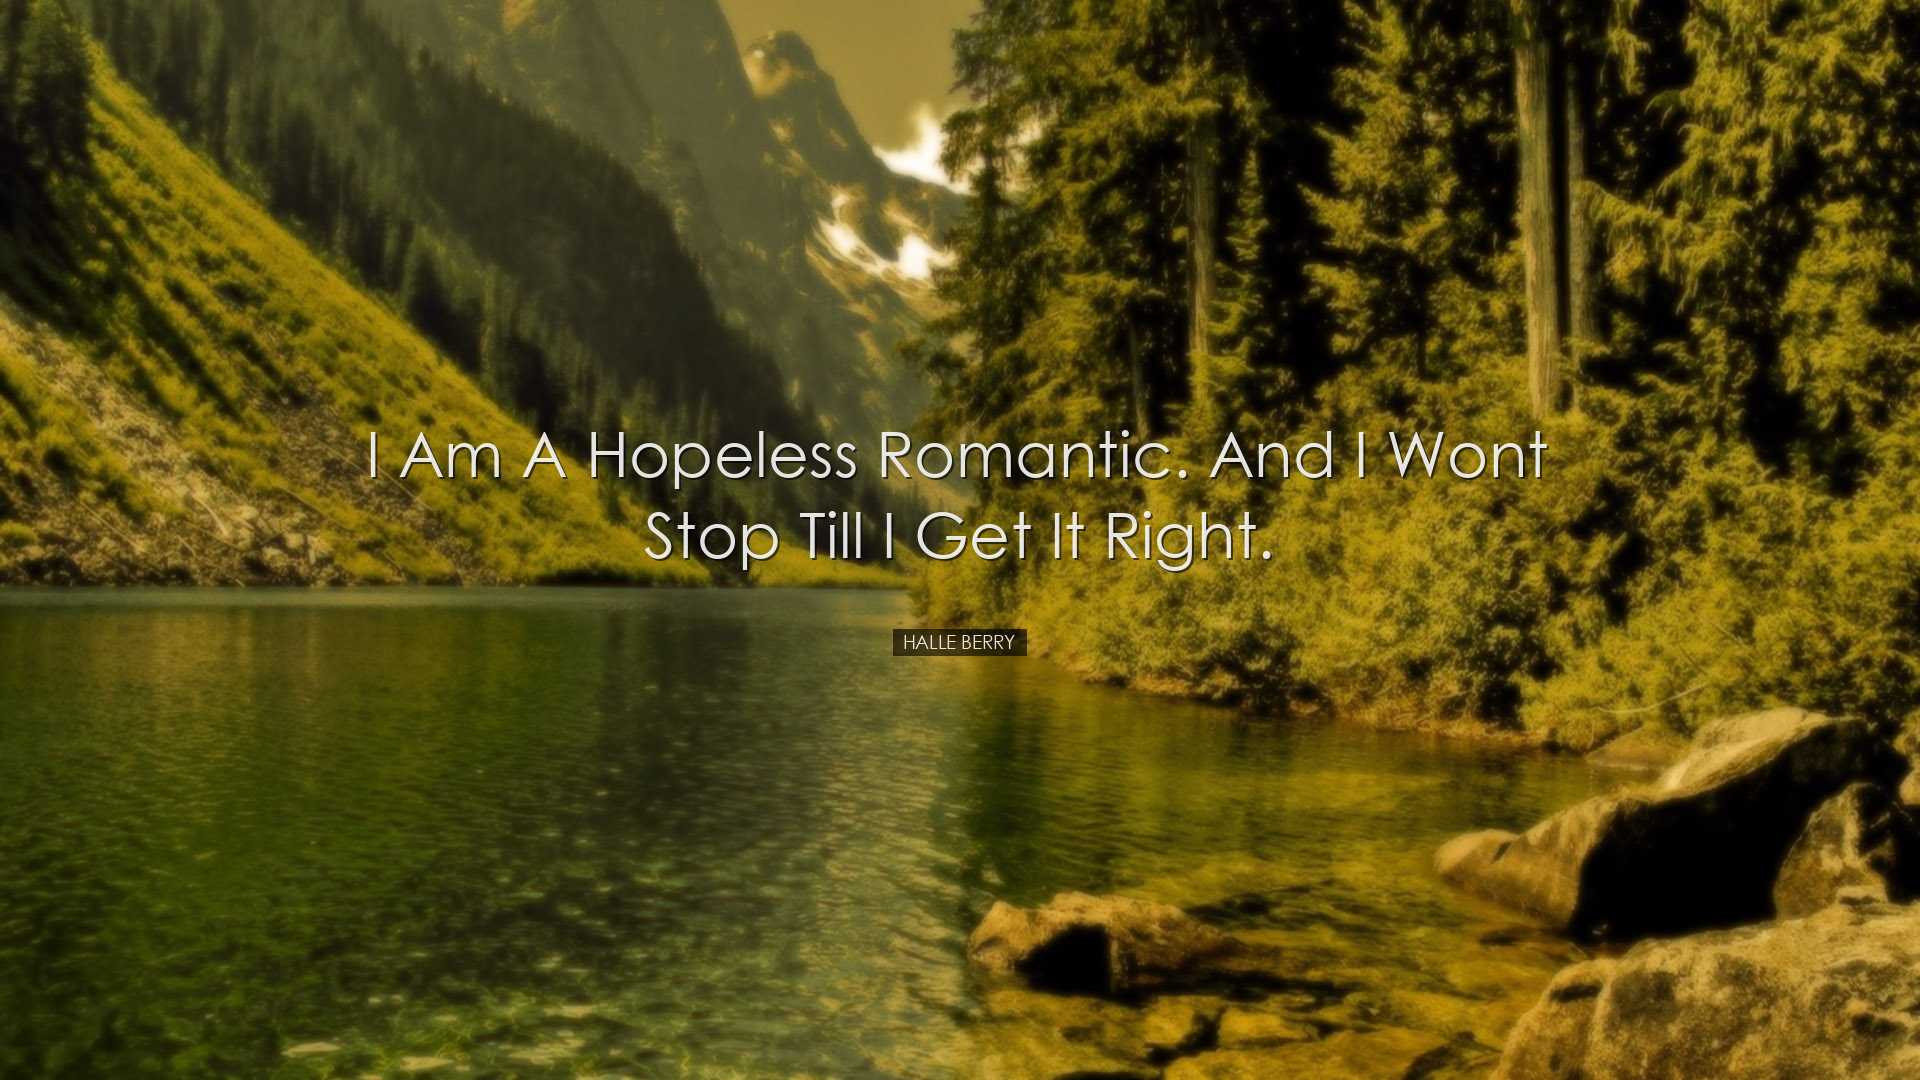 I am a hopeless romantic. And I wont stop till I get it right. - H